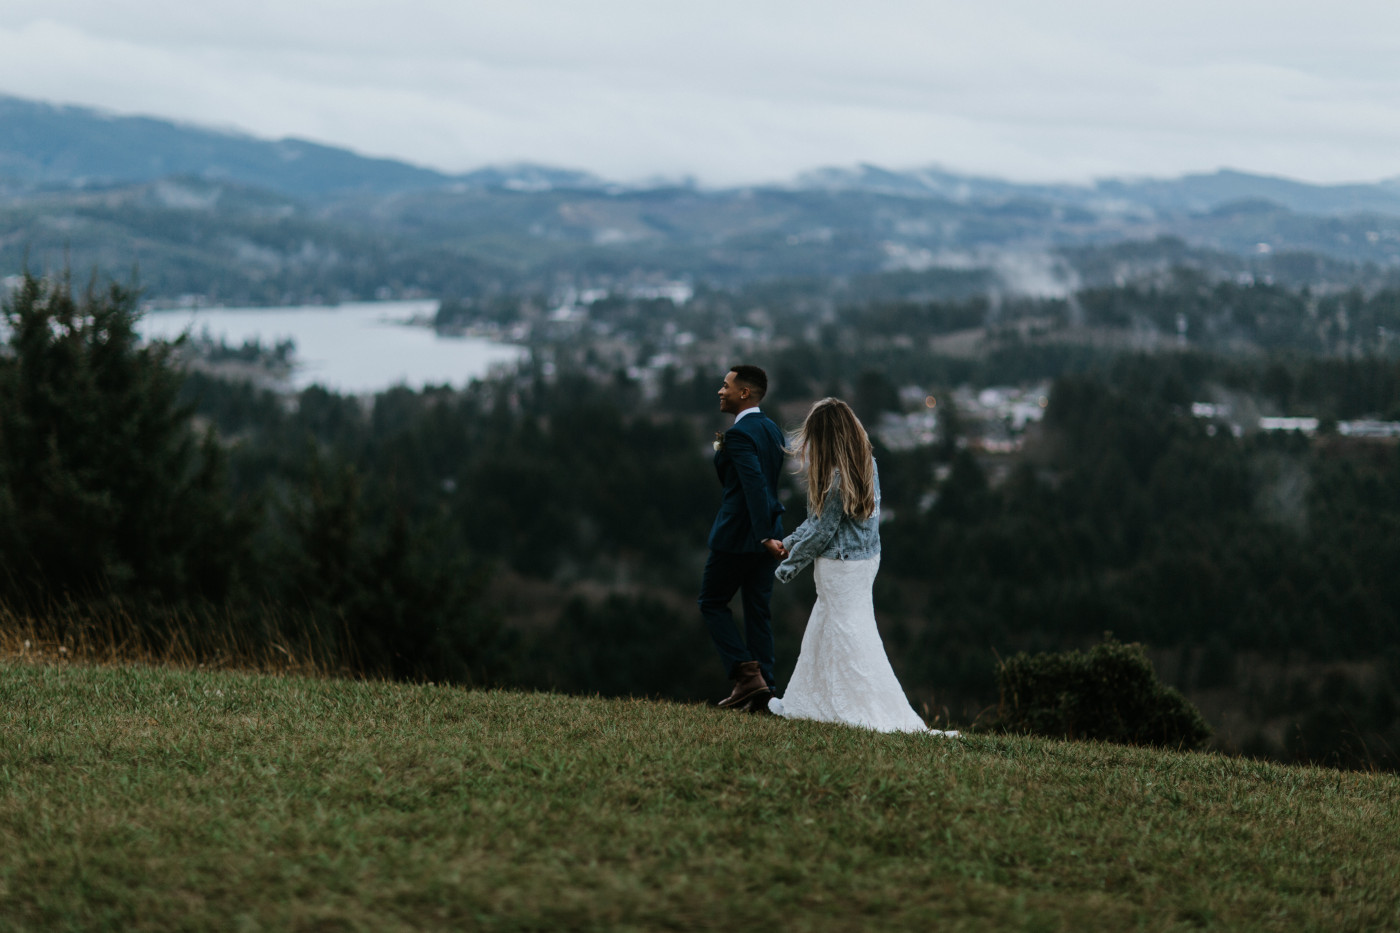 Margaux and Ariana walk hand in hand. Elopement photography at Mount Hood by Sienna Plus Josh.